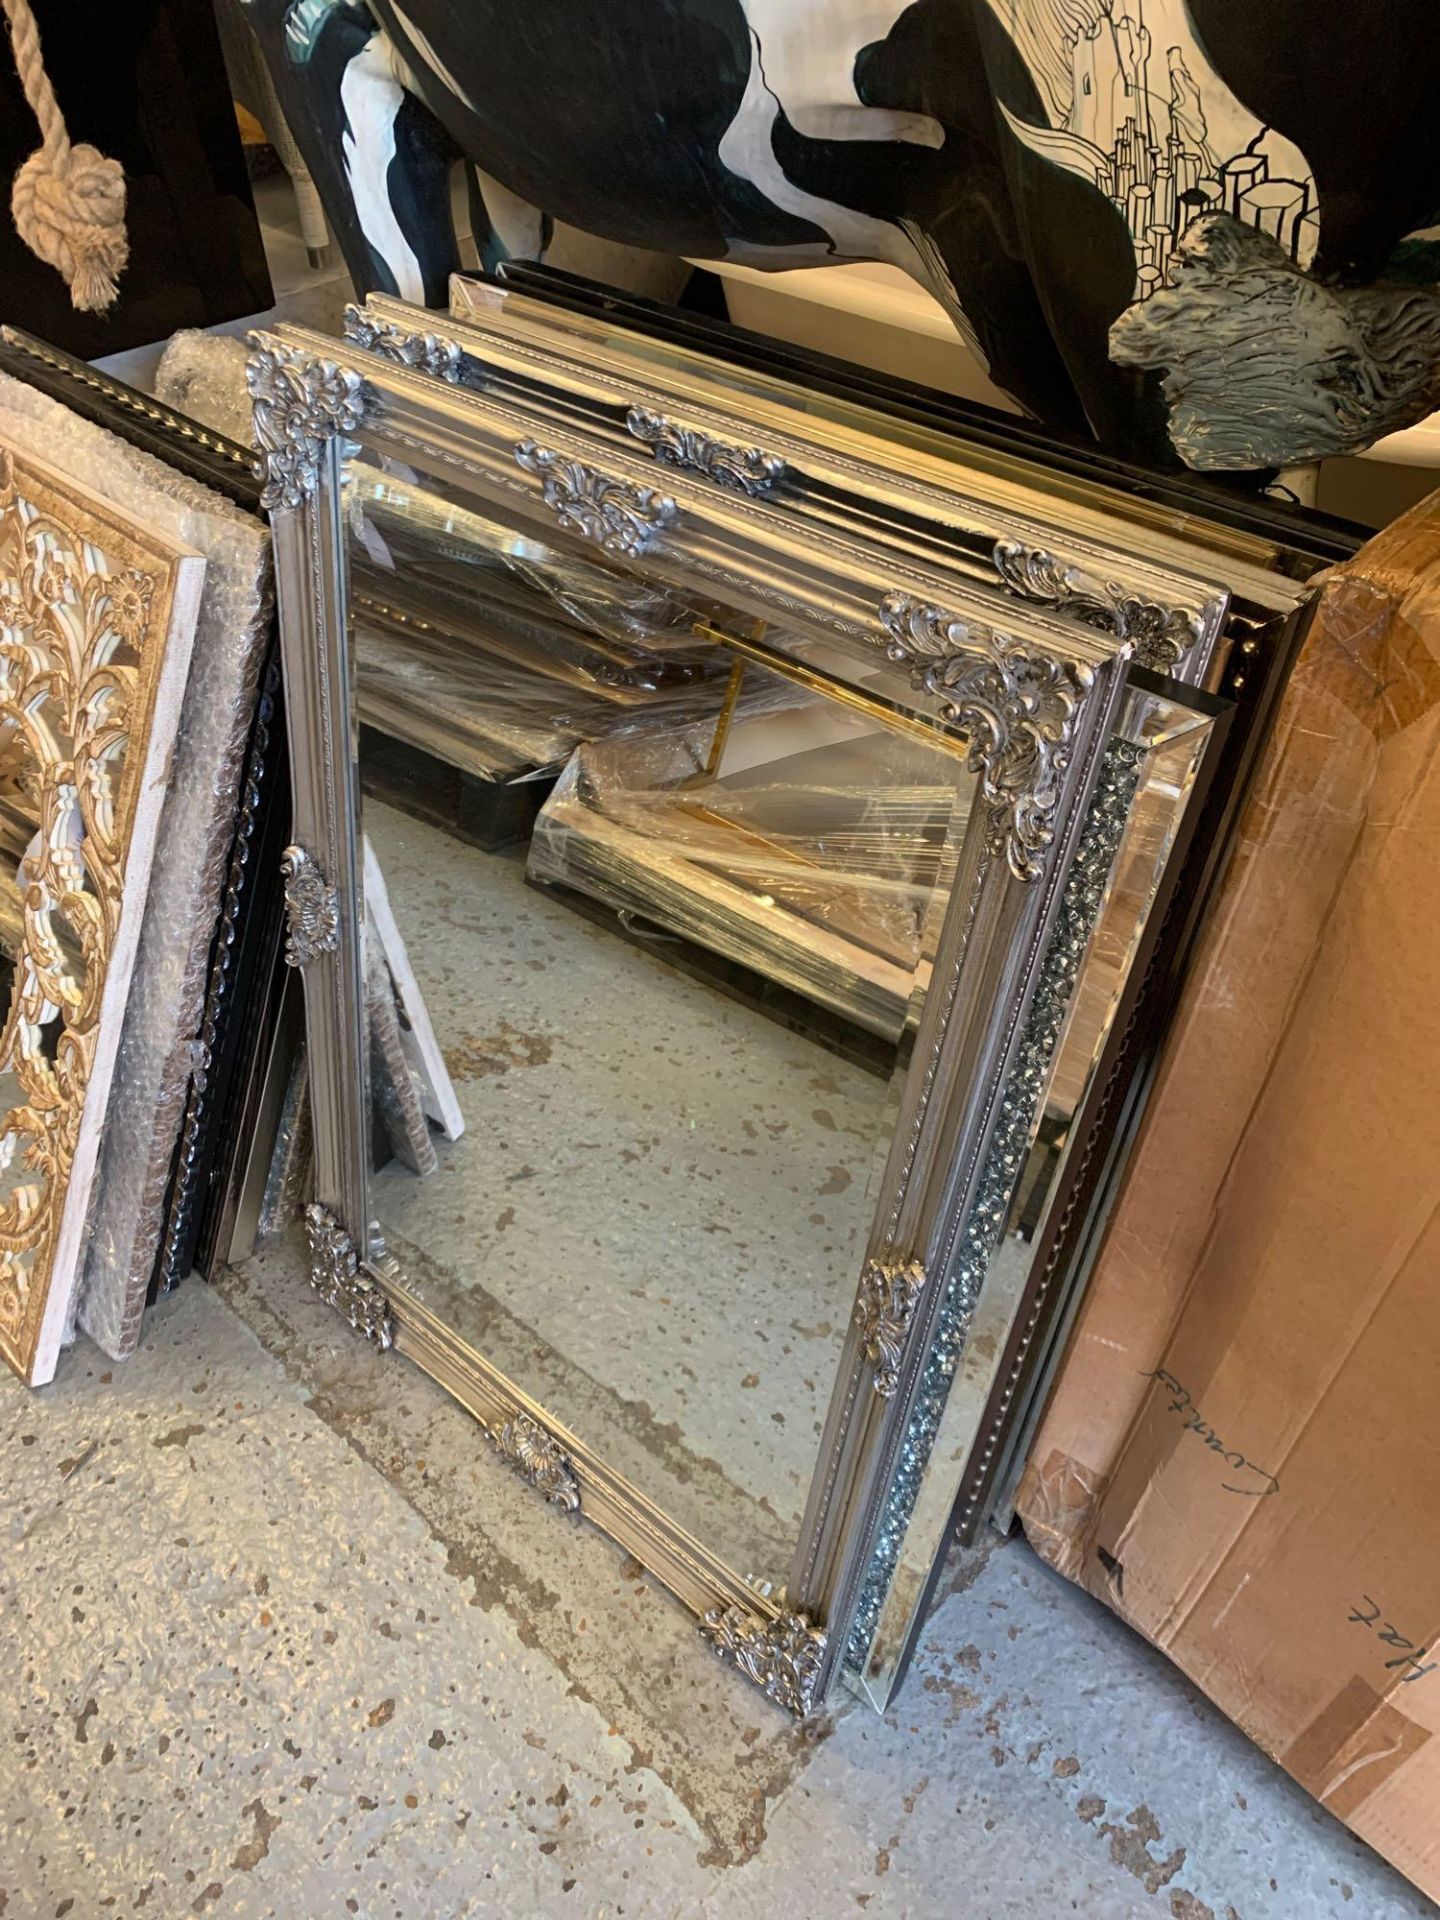 Fiennes Rectangle Mirror Silver 610 X 920mm This Vintage Inspired Piece Rectangle Mirror With Its - Image 4 of 4